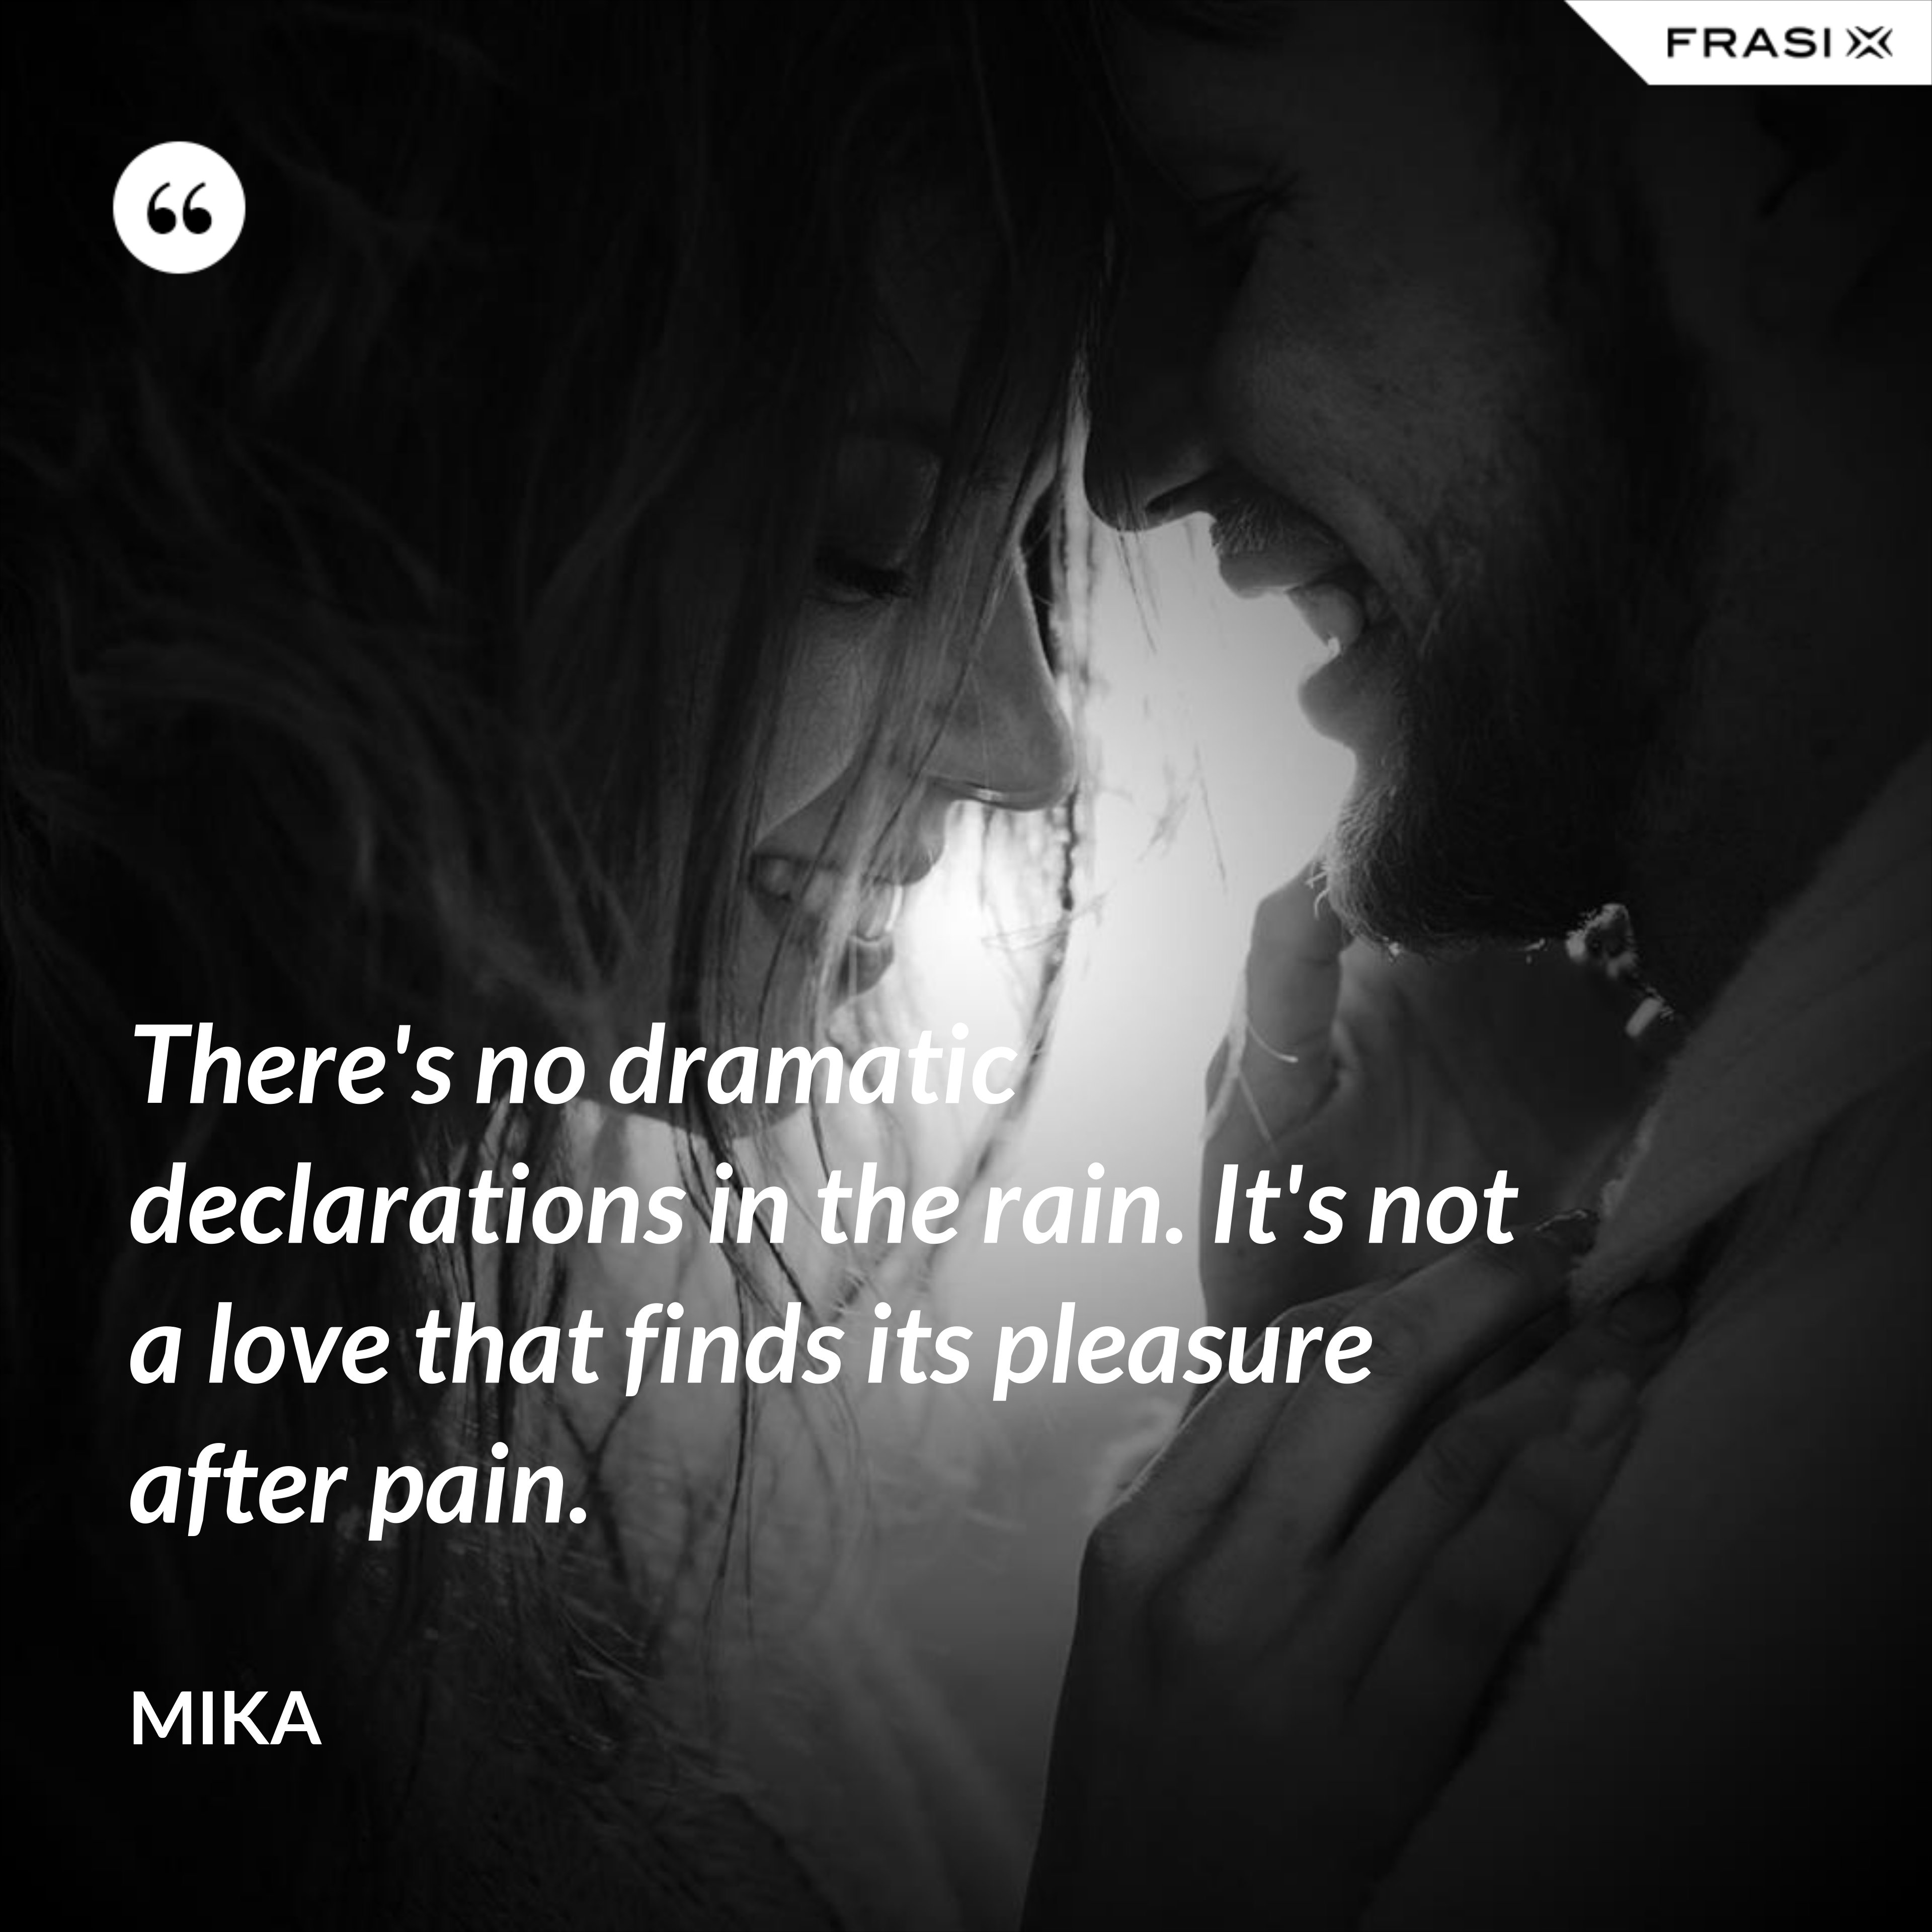 There's no dramatic declarations in the rain. It's not a love that finds its pleasure after pain. - Mika